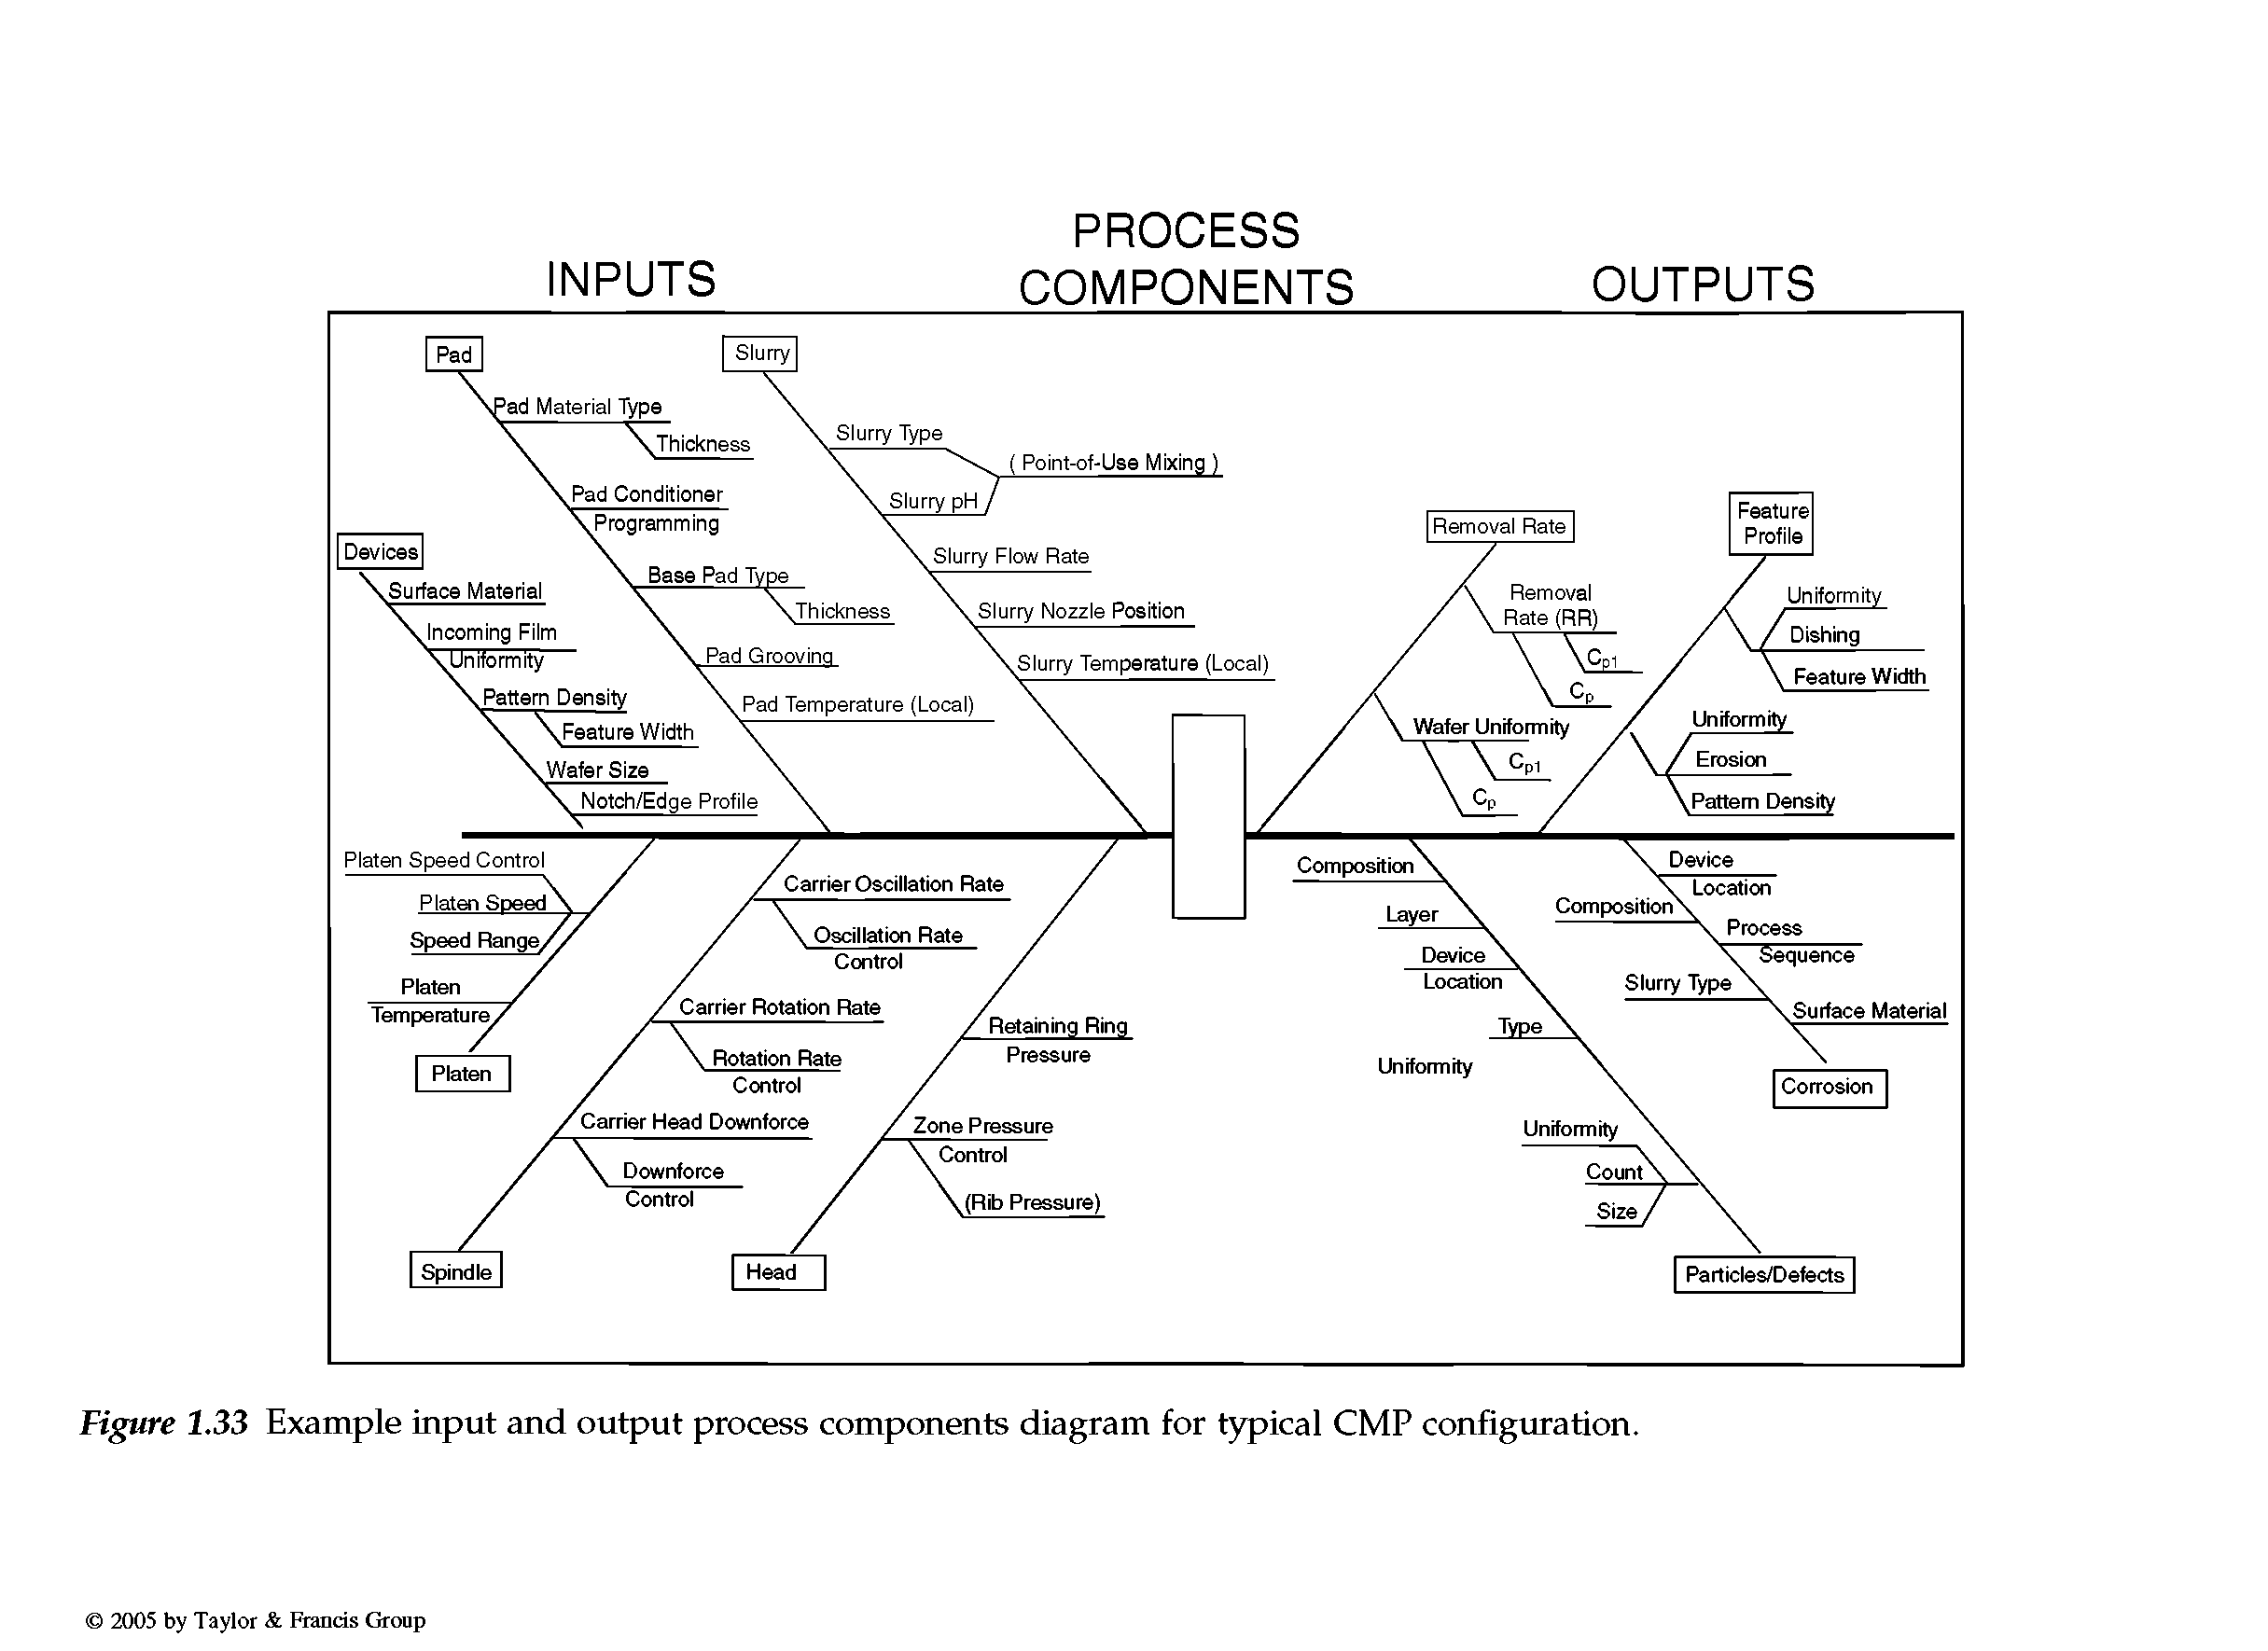 Figure 1.33 Example input and output process components diagram for typical CMP configuration.